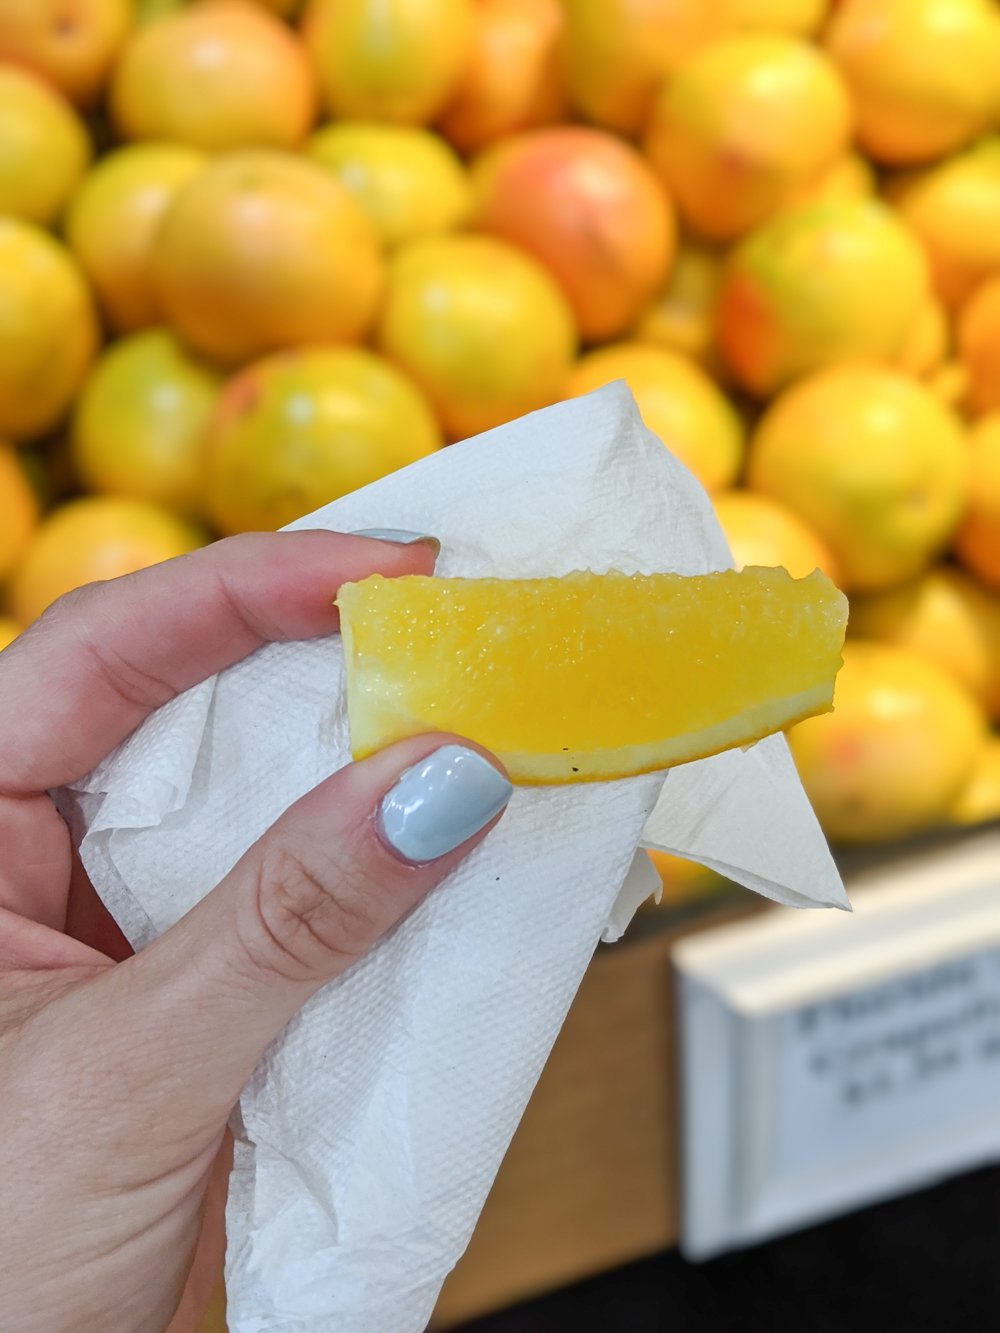 2 days in Fort Myers, Florida, a fun weekend itinerary: Sun Harvest Citrus factory, orange samples